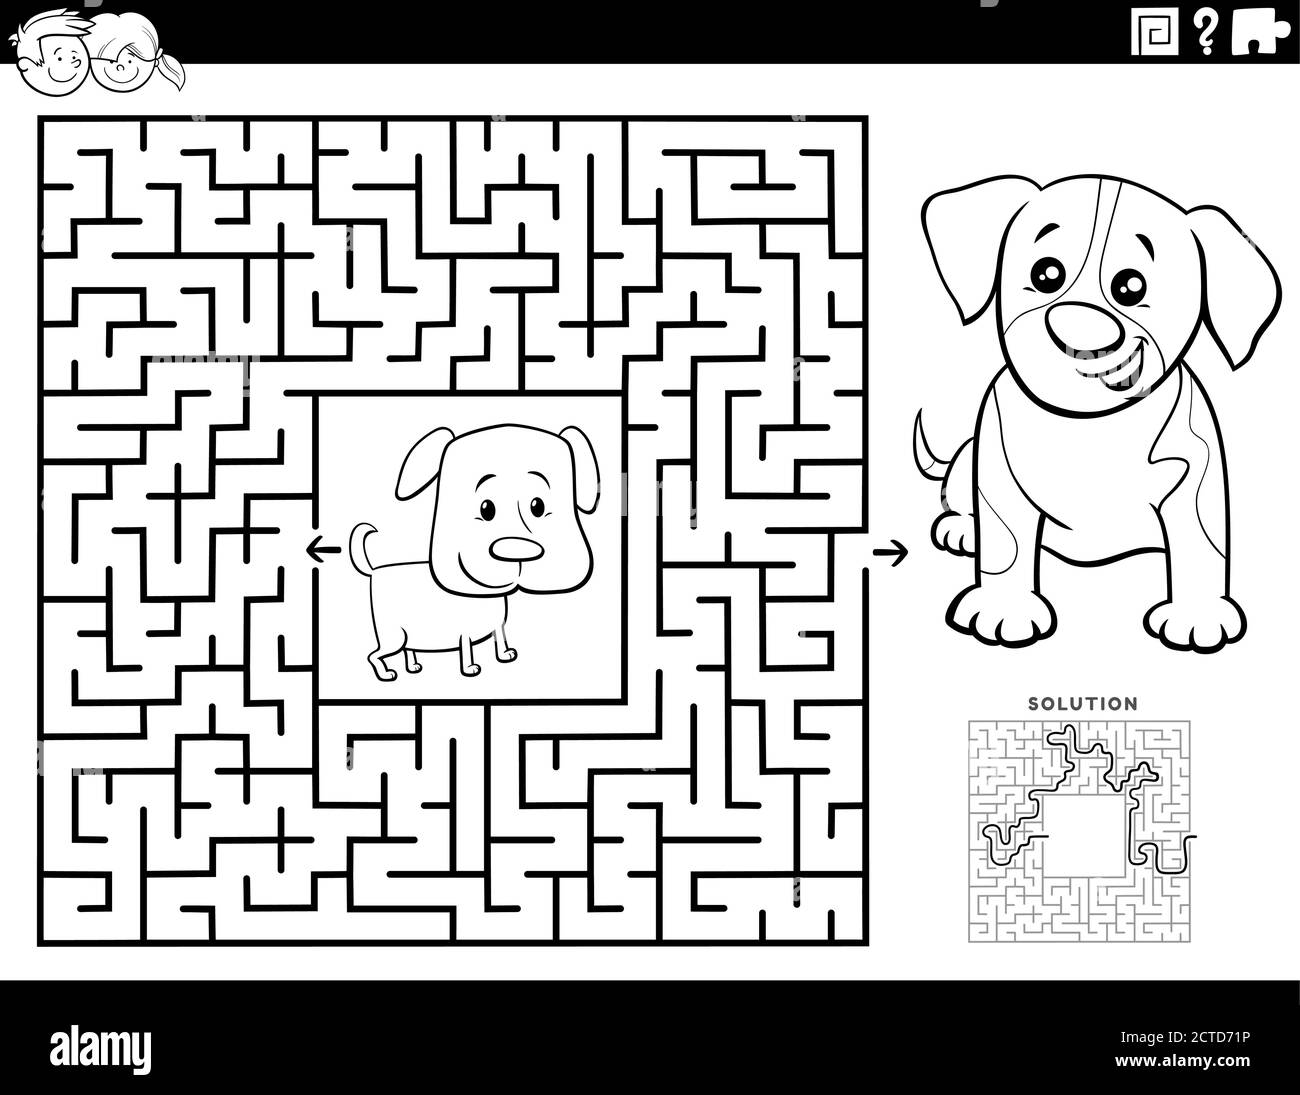 https://c8.alamy.com/comp/2CTD71P/black-and-white-cartoon-illustration-of-educational-maze-puzzle-game-for-children-with-puppies-coloring-book-page-2CTD71P.jpg